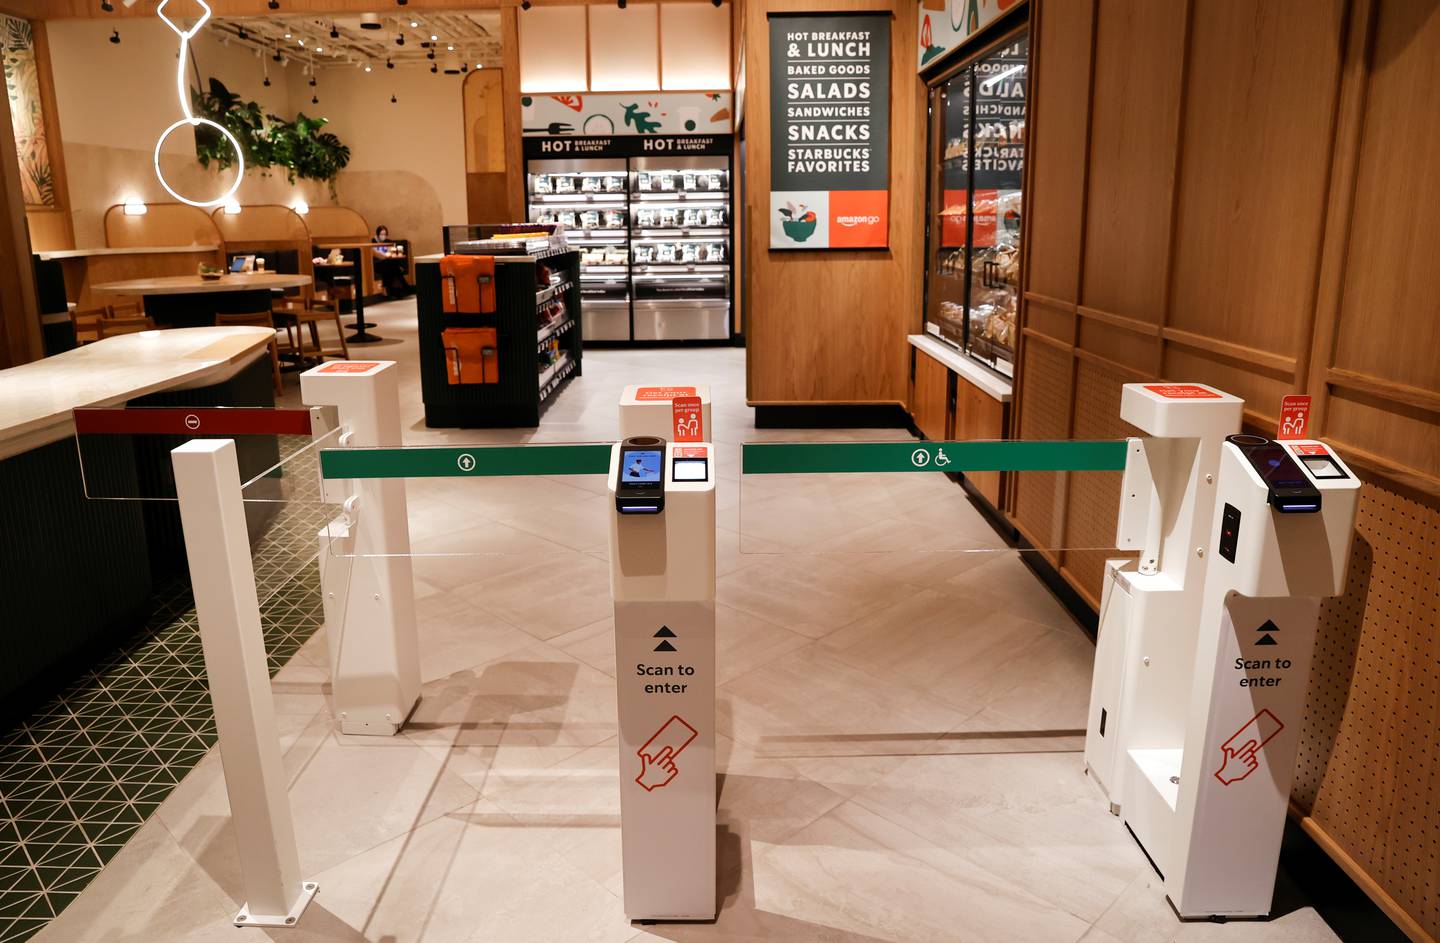 The entrance turnstiles of a new Starbucks outlet, its first in partnership with Amazon Go that lets customers check out without a cashier, in New York. Reuters